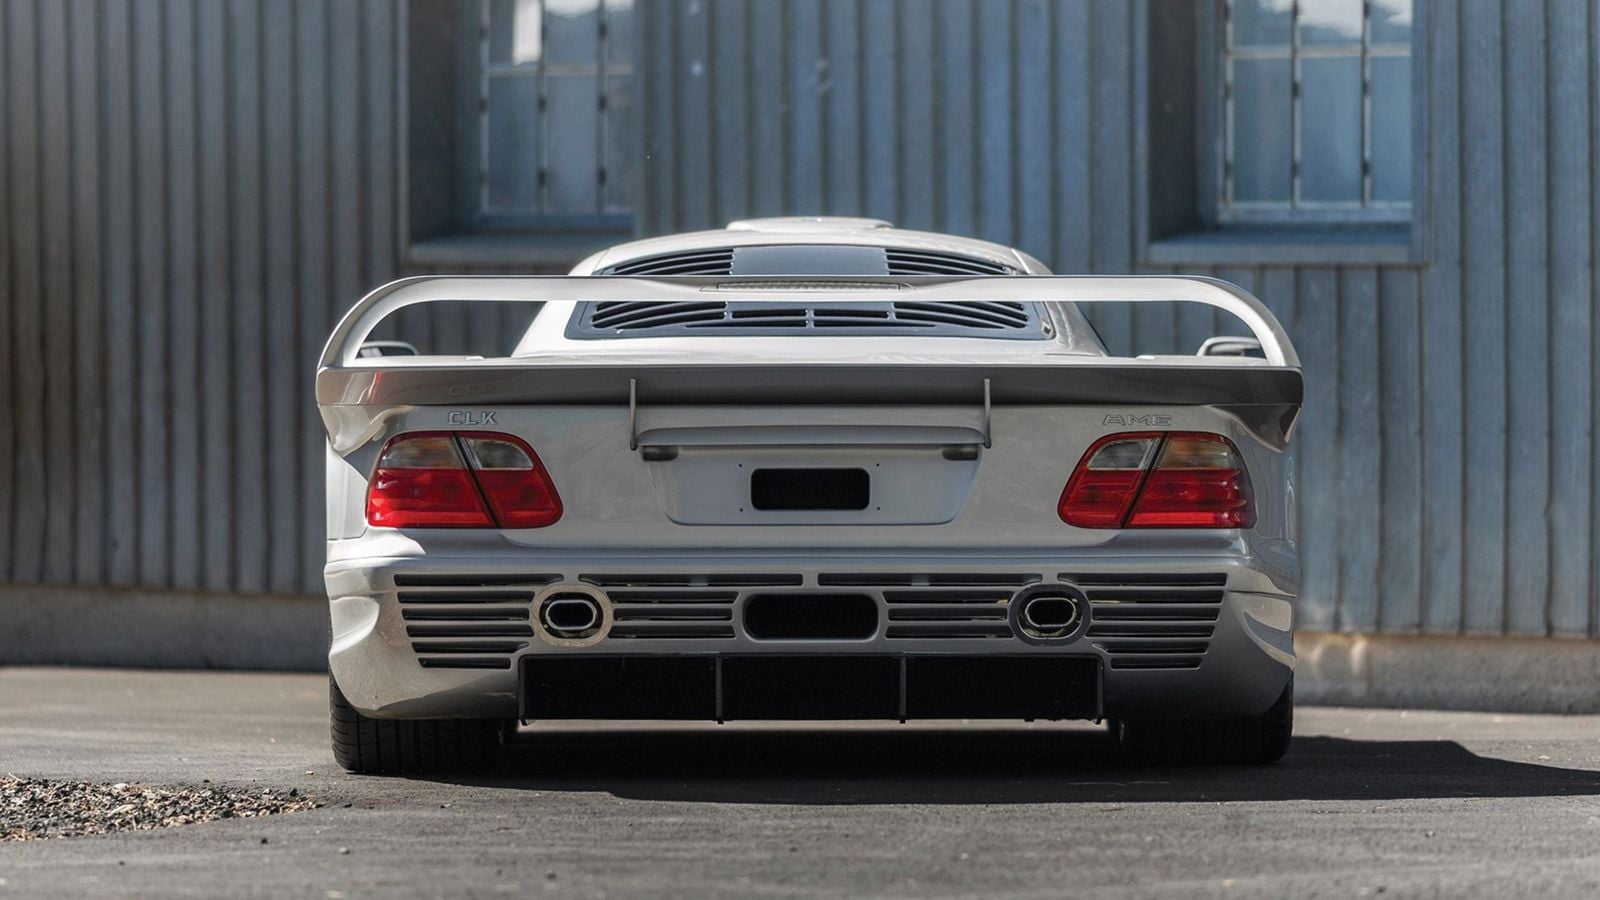 Rare Mercedes-Benz CLK GTR Roadster sells for $15 million at auction - Drive